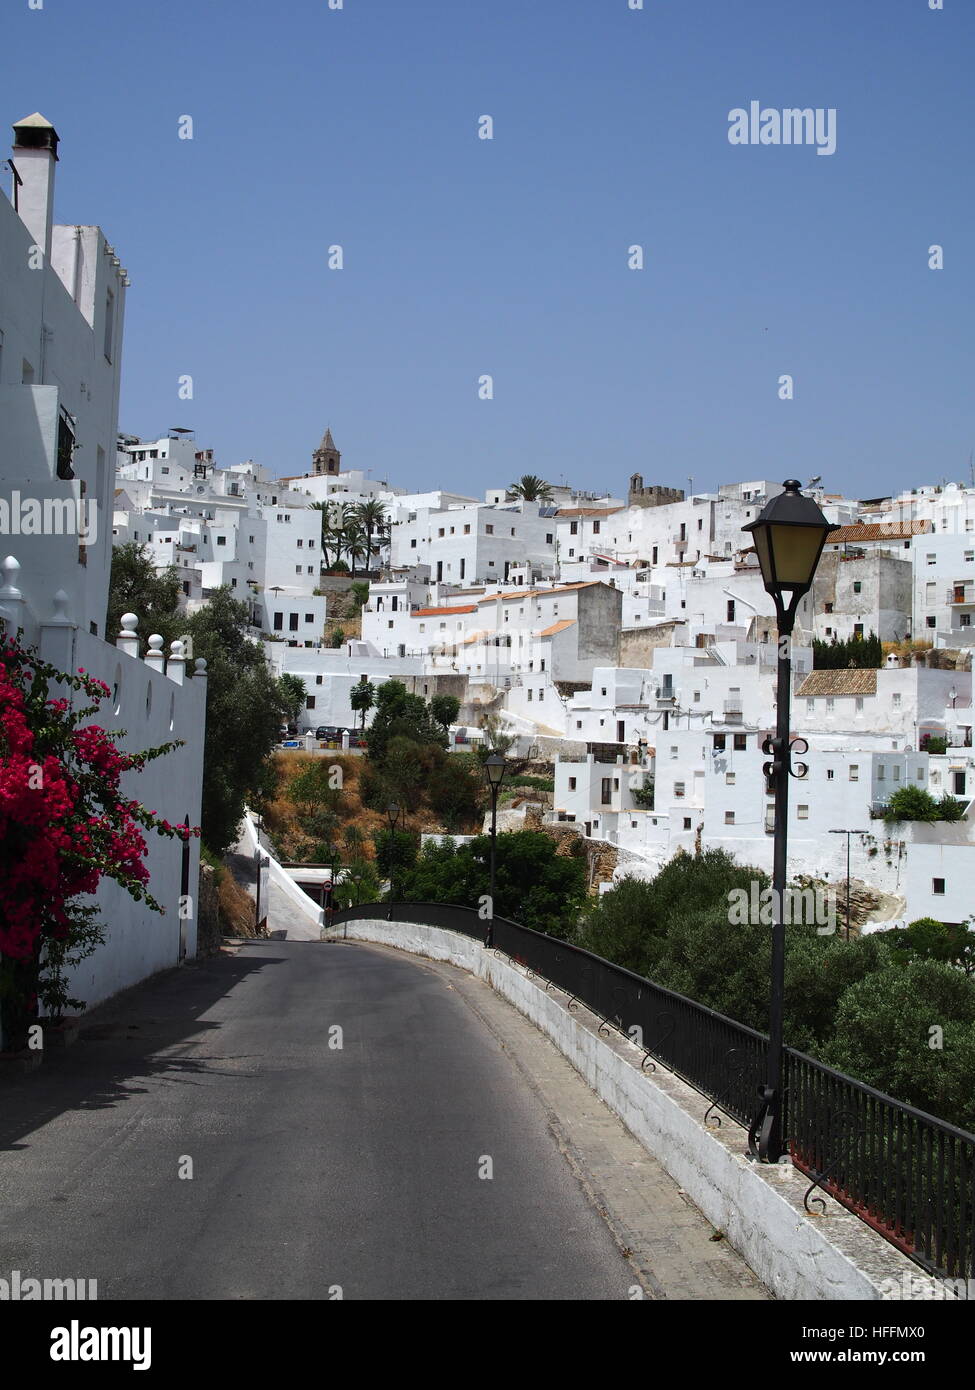 White painted buildings of hilltop town Stock Photo